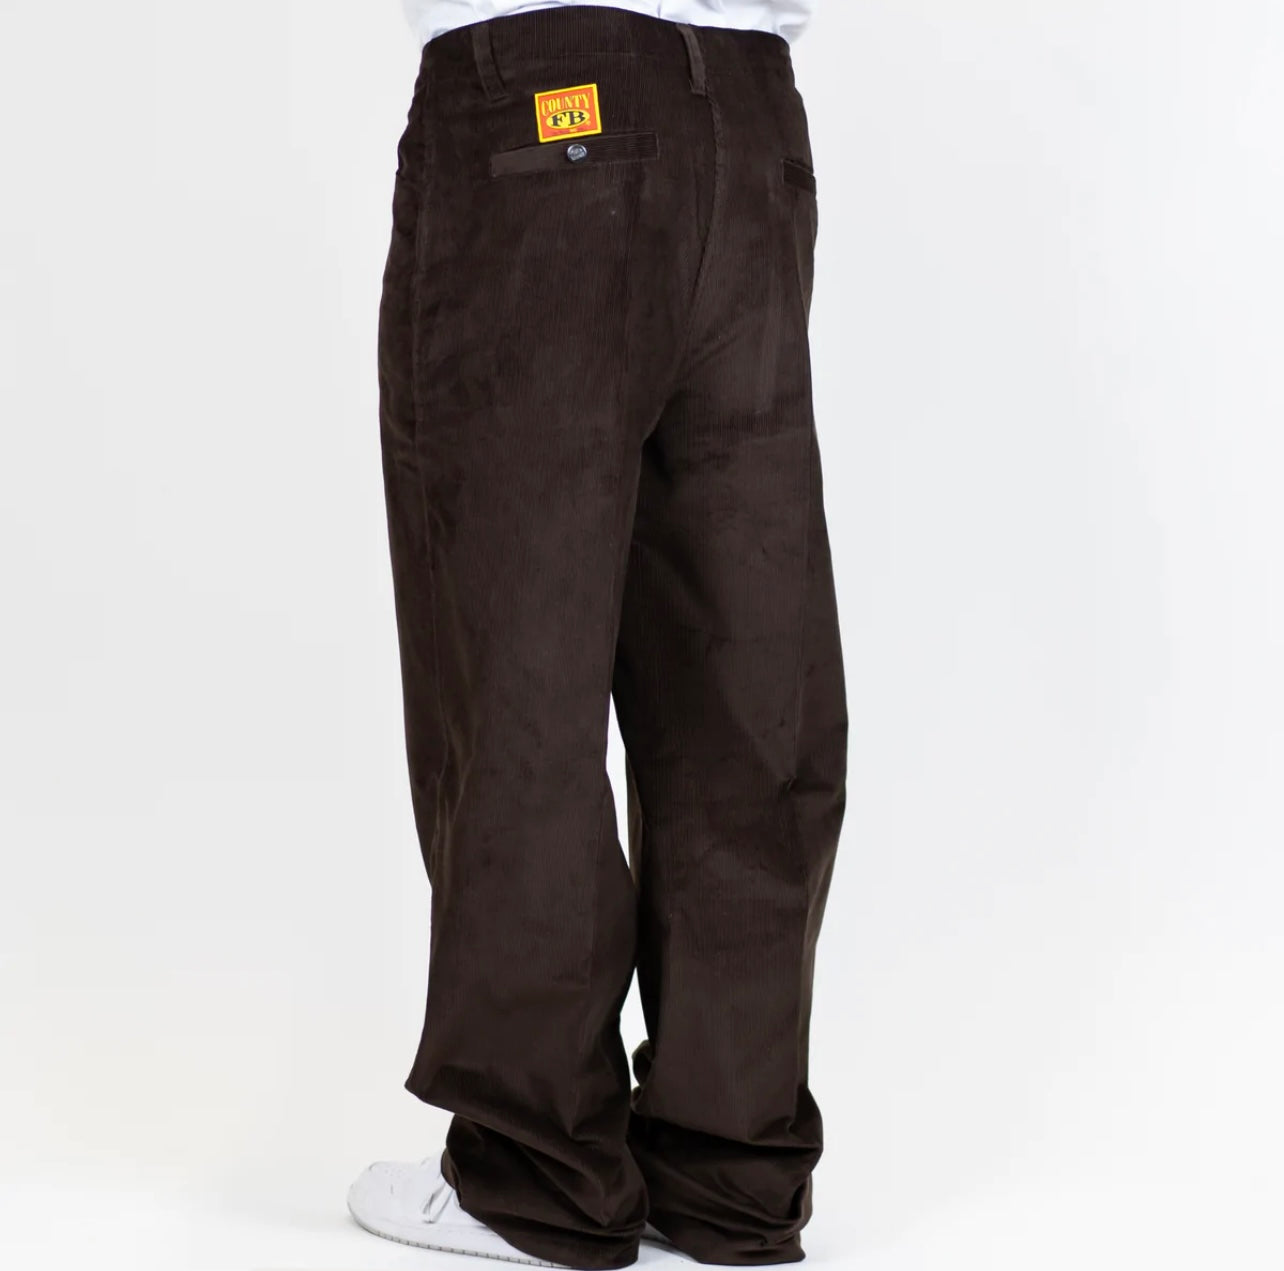 Fb County Corduroy Pants - Brown – PachucosRus 112 Anderson st